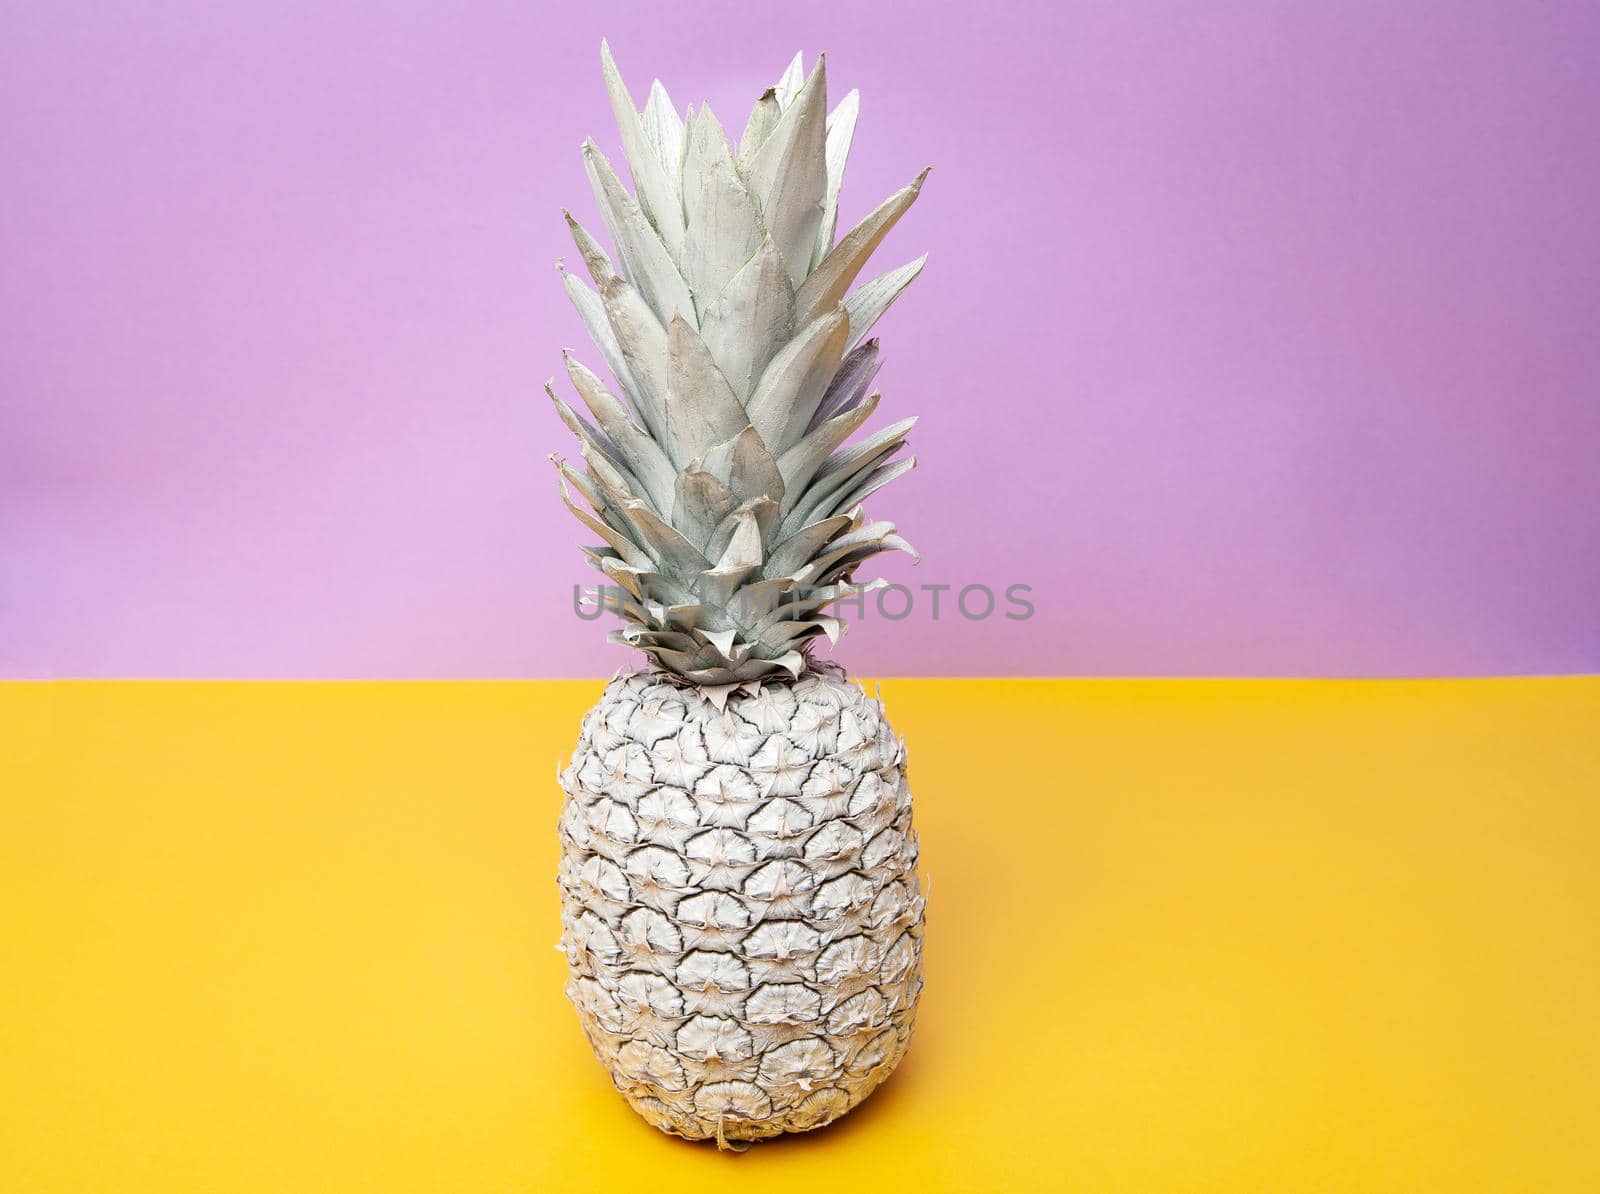 White whole fresh pineapple placed on table in modern studio on violet and yellow background